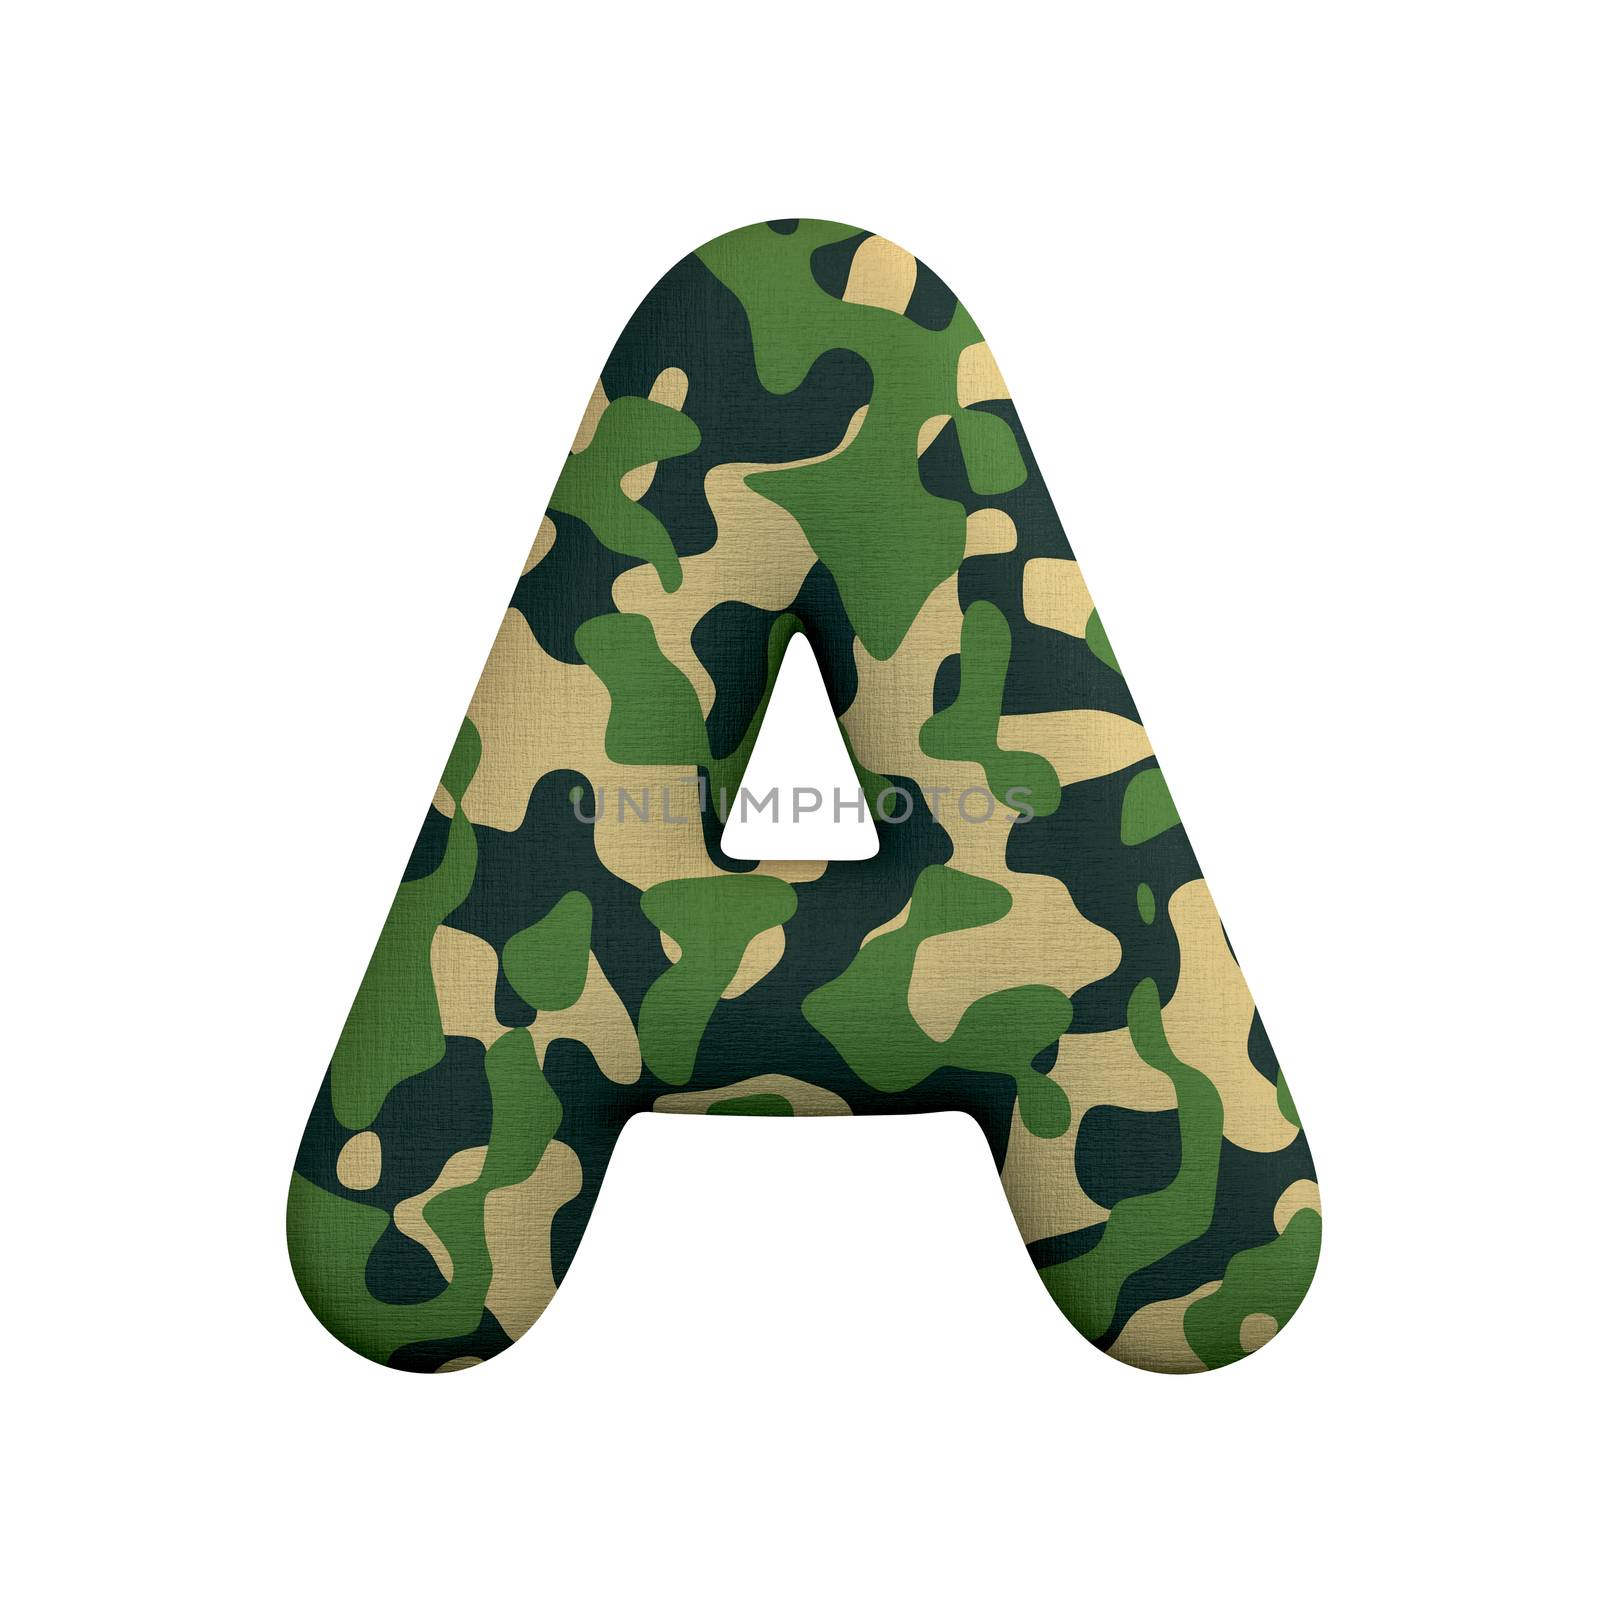 Army letter A - Capital 3d Camo font isolated on white background. This alphabet is perfect for creative illustrations related but not limited to Army, war, survivalism...